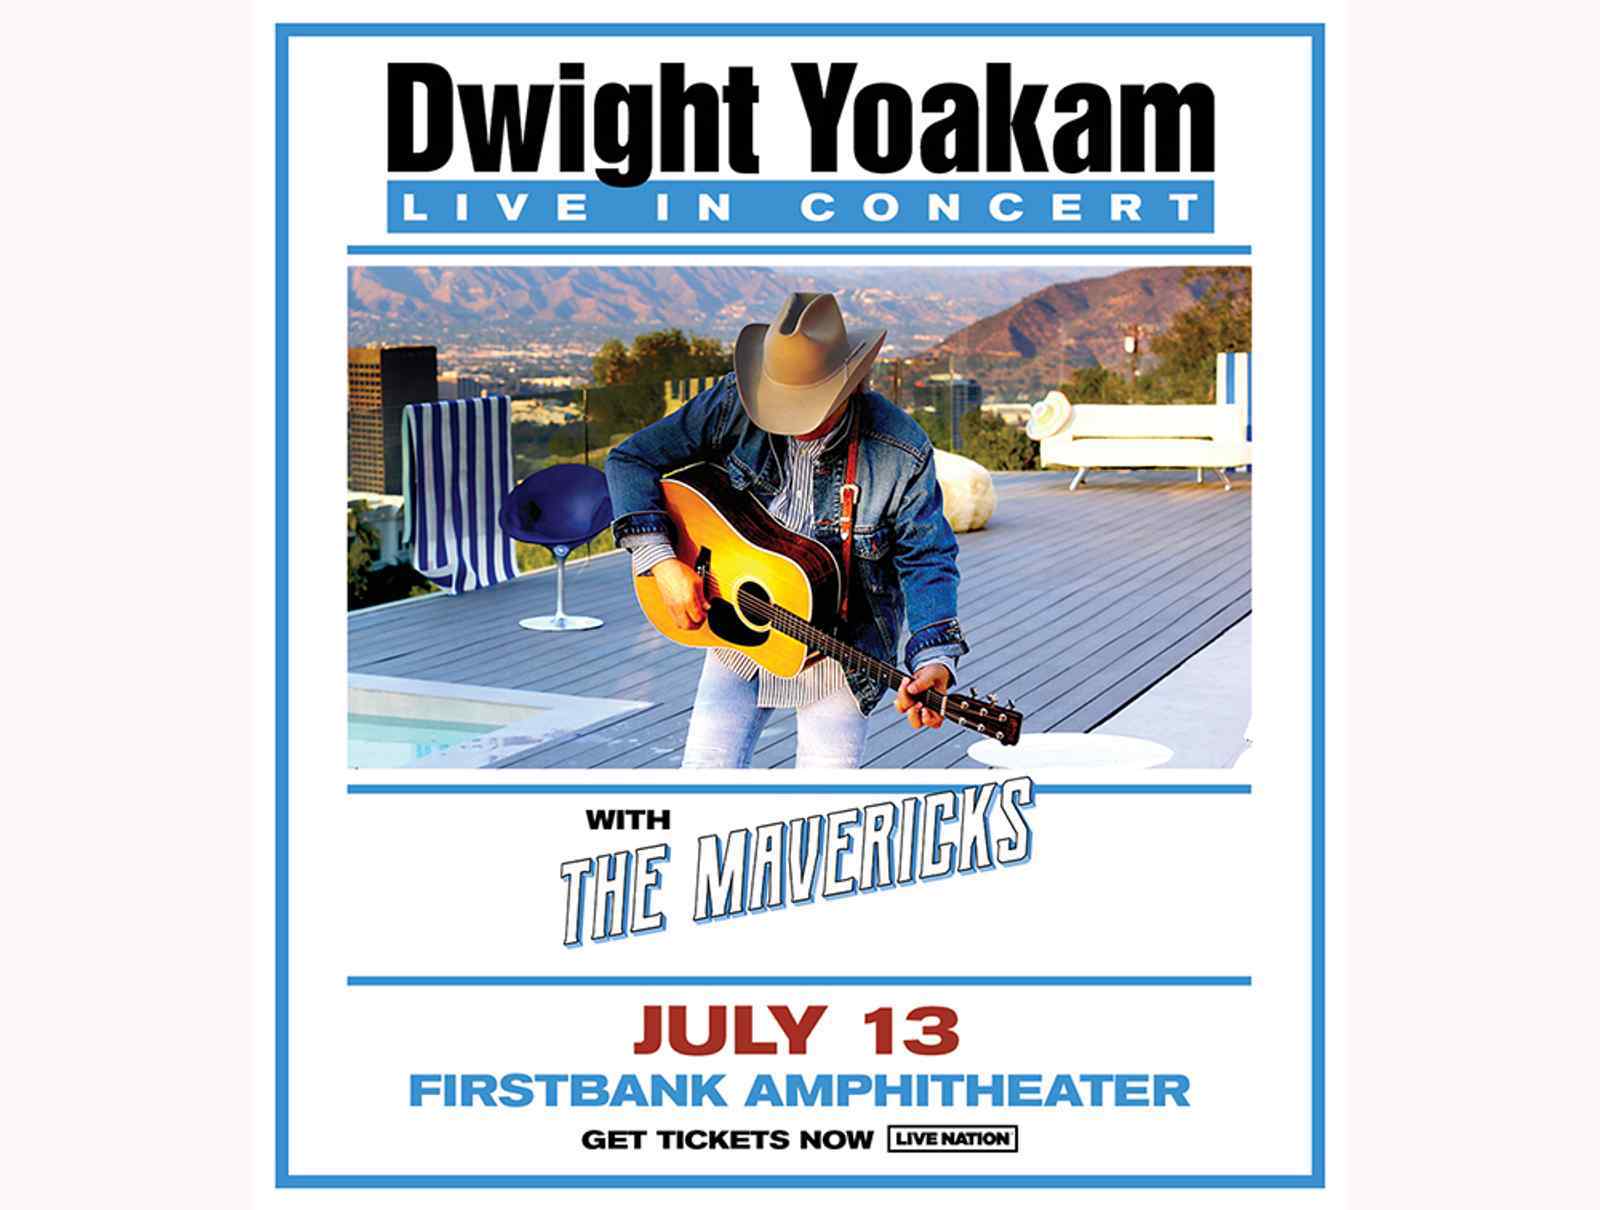 Dwight Yoakam with special guests The Mavericks